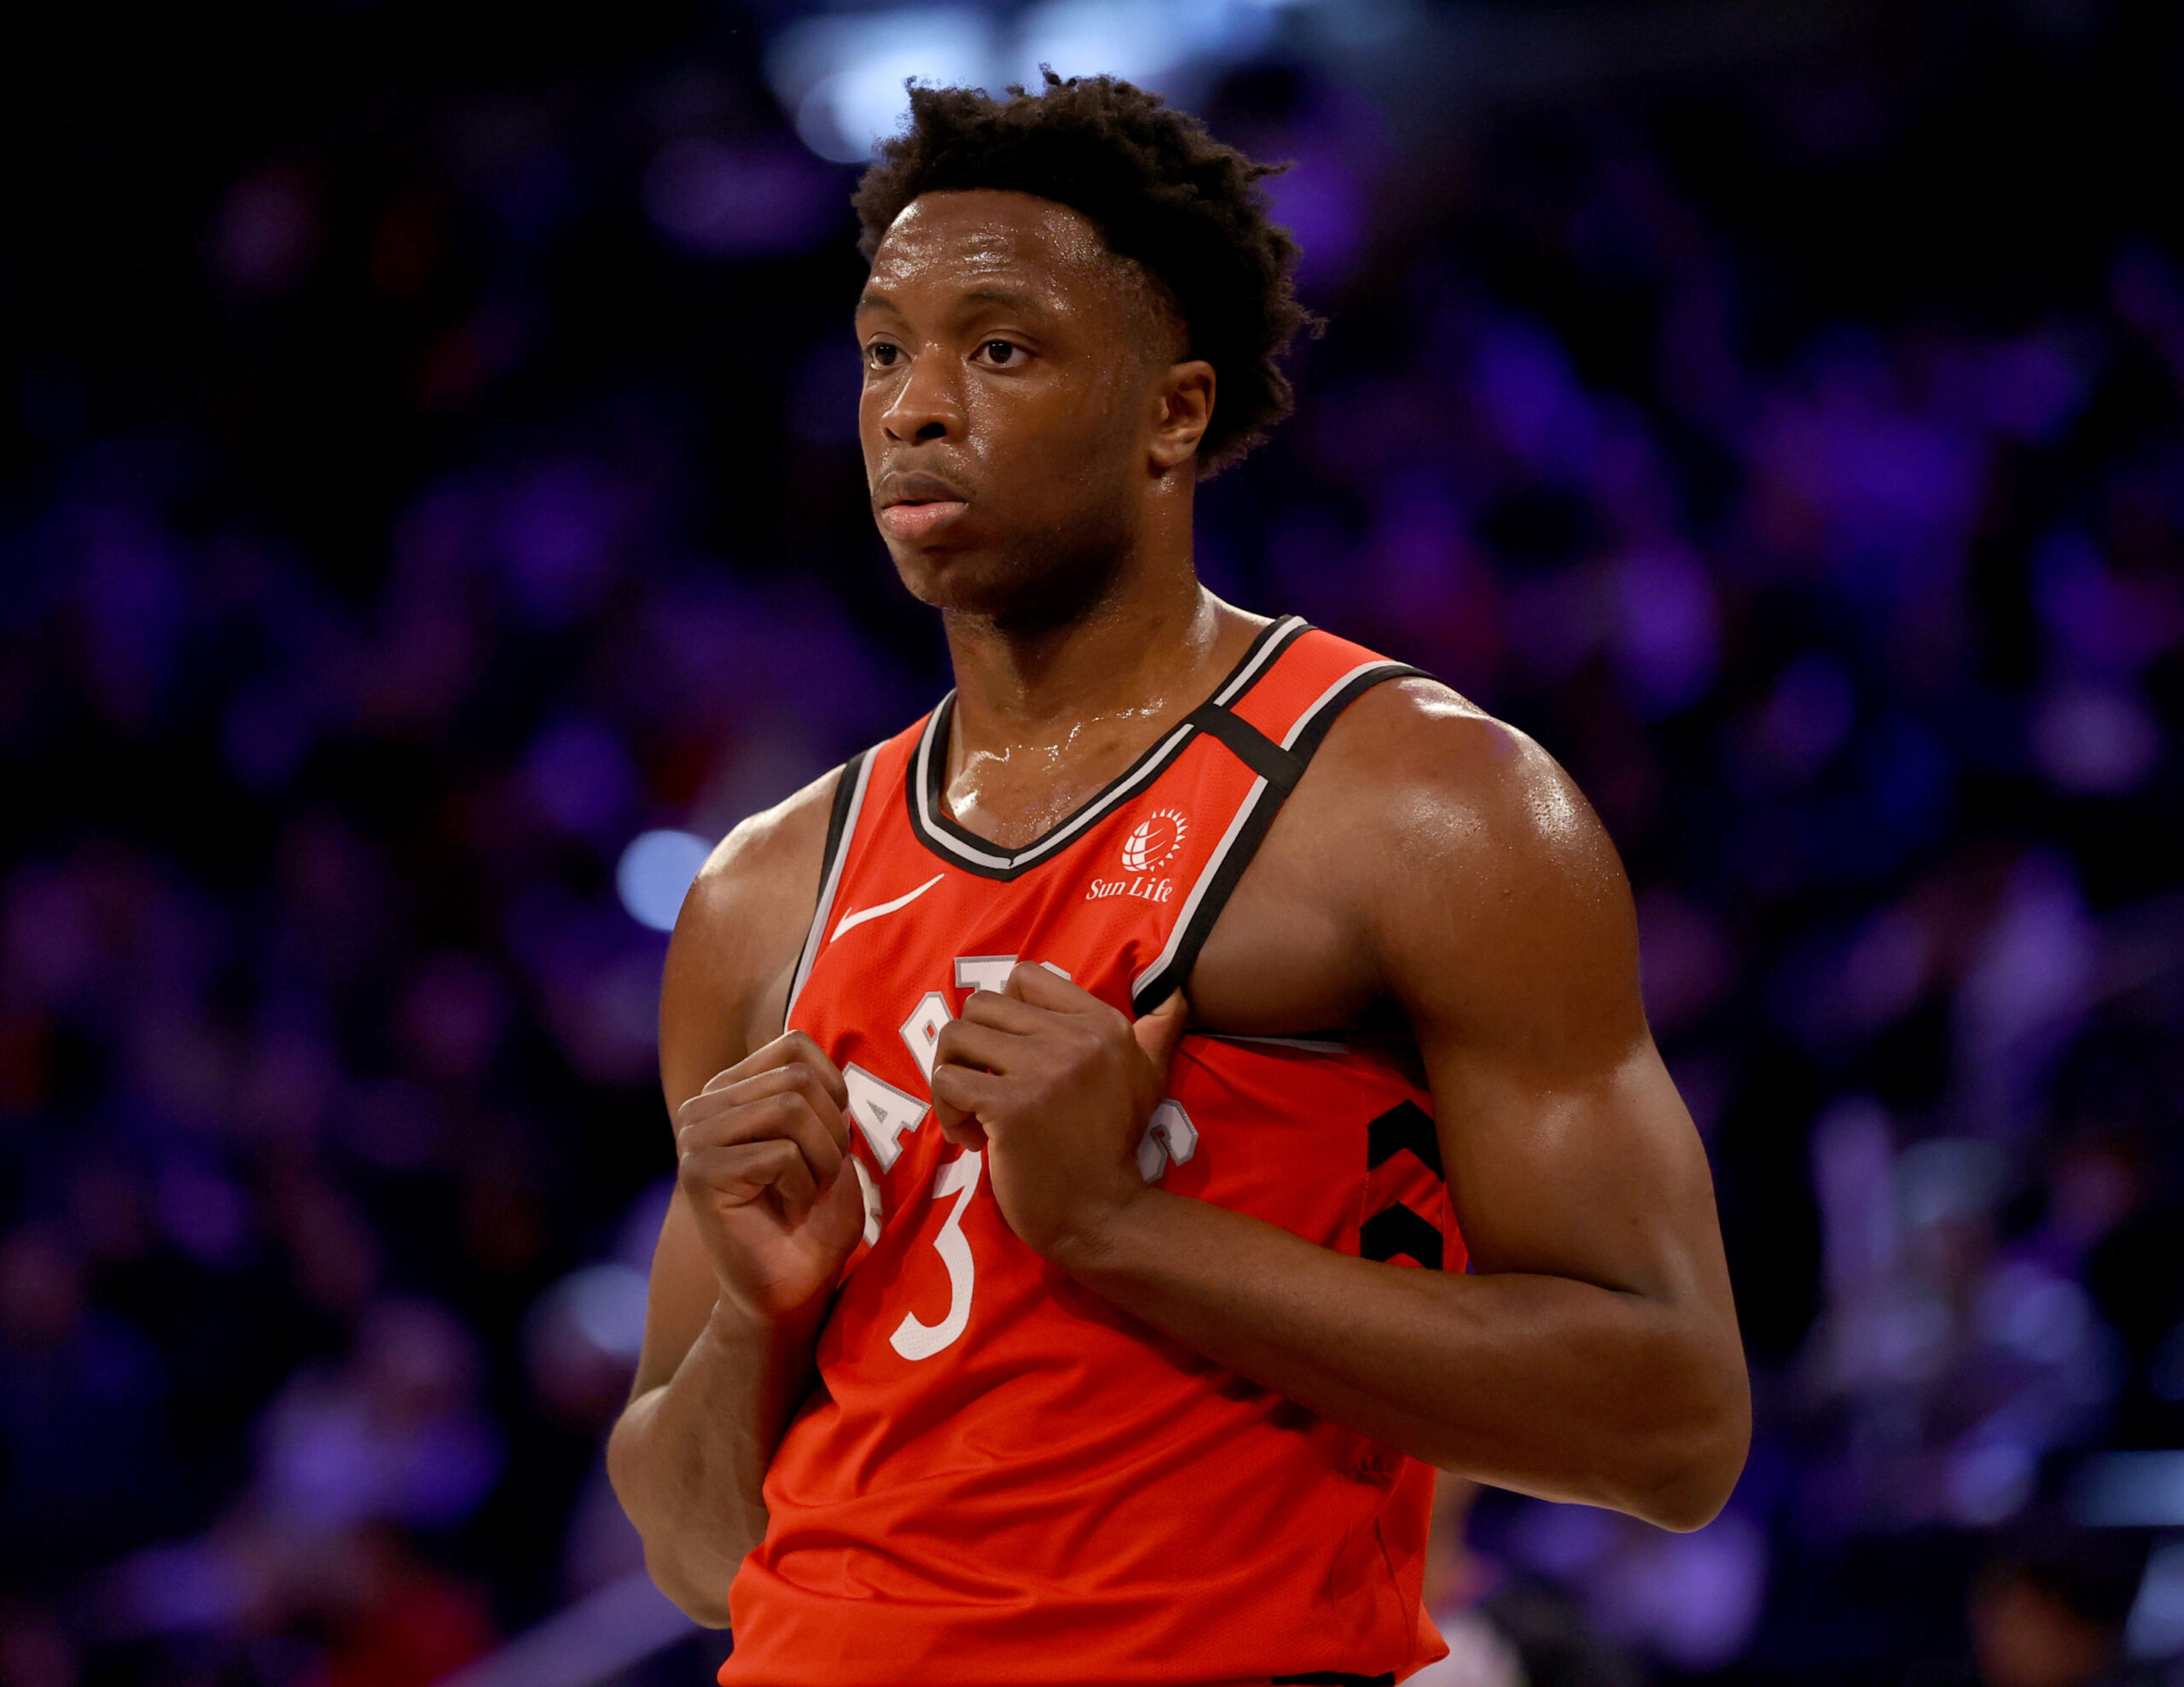 NEW YORK, NEW YORK - JANUARY 24:  OG Anunoby #3 of the Toronto Raptors wait at the line during a foul shot in the second half against the New York Knicks at Madison Square Garden on January 24, 2020 in New York City.The Toronto Raptors defeated the New York Knicks 118-112.NOTE TO USER: User expressly acknowledges and agrees that, by downloading and or using this photograph, User is consenting to the terms and conditions of the Getty Images License Agreement. (Photo by Elsa/Getty Images)